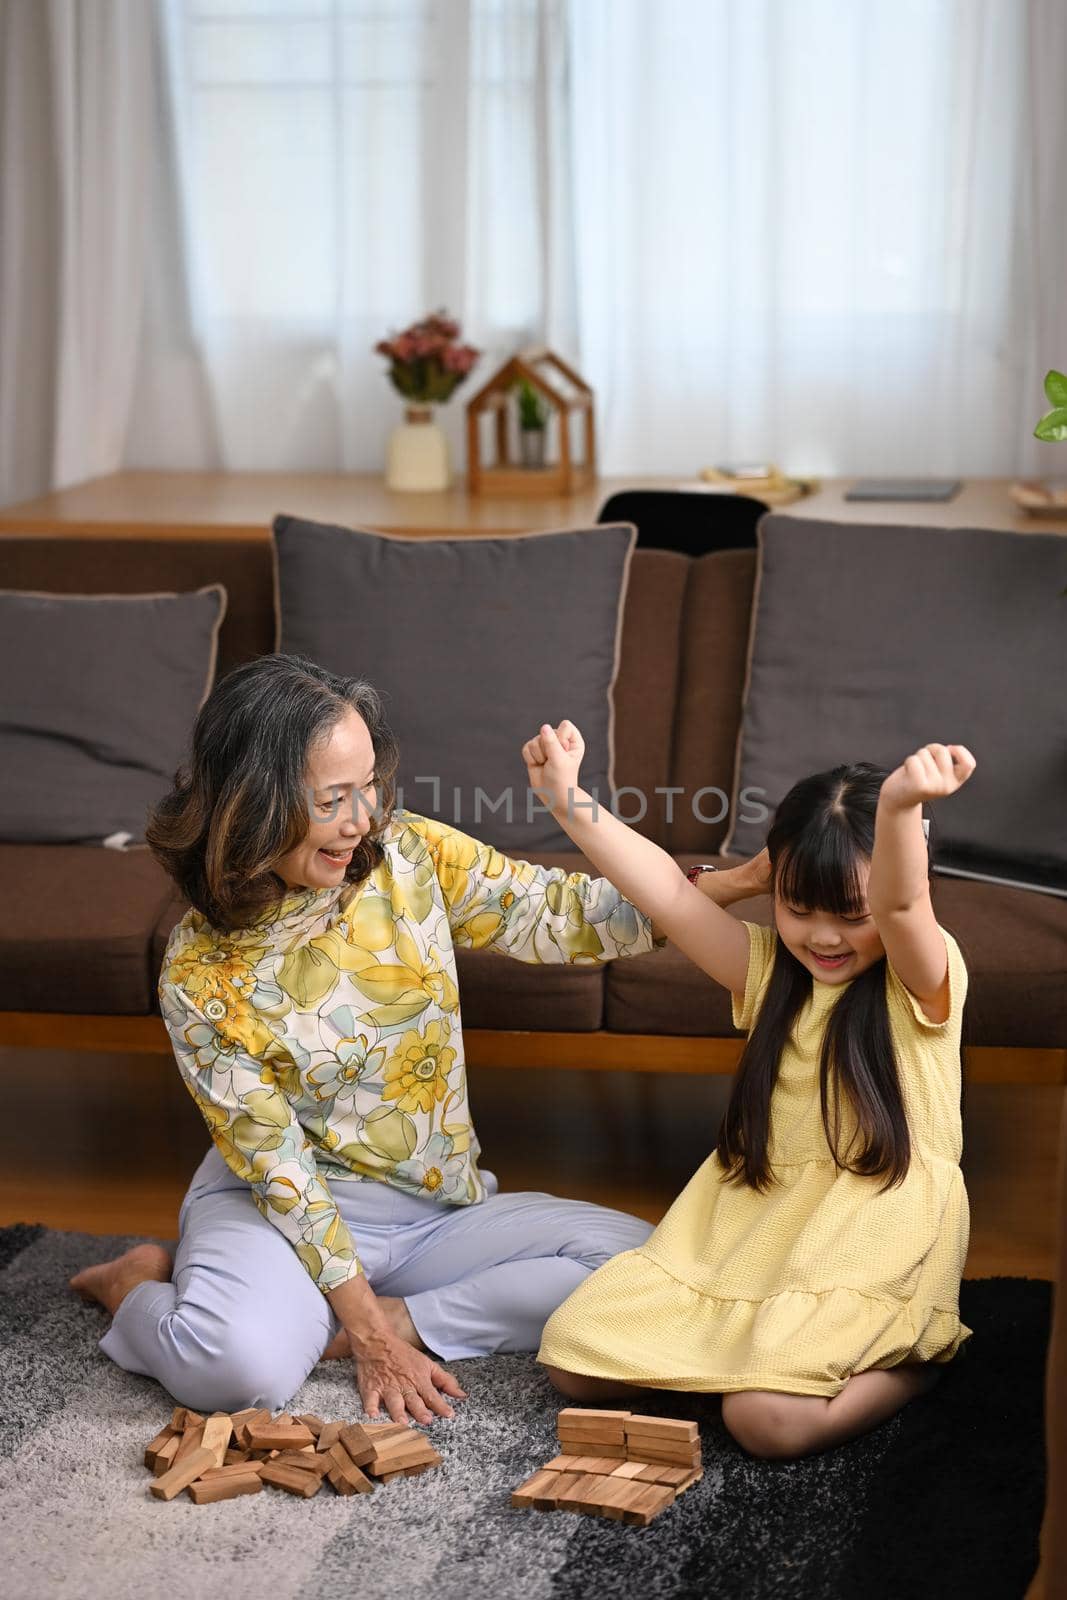 Happy mature grandmother having fun playing with cute little preschooler granddaughter in living room. Multi generational, family and love concept.